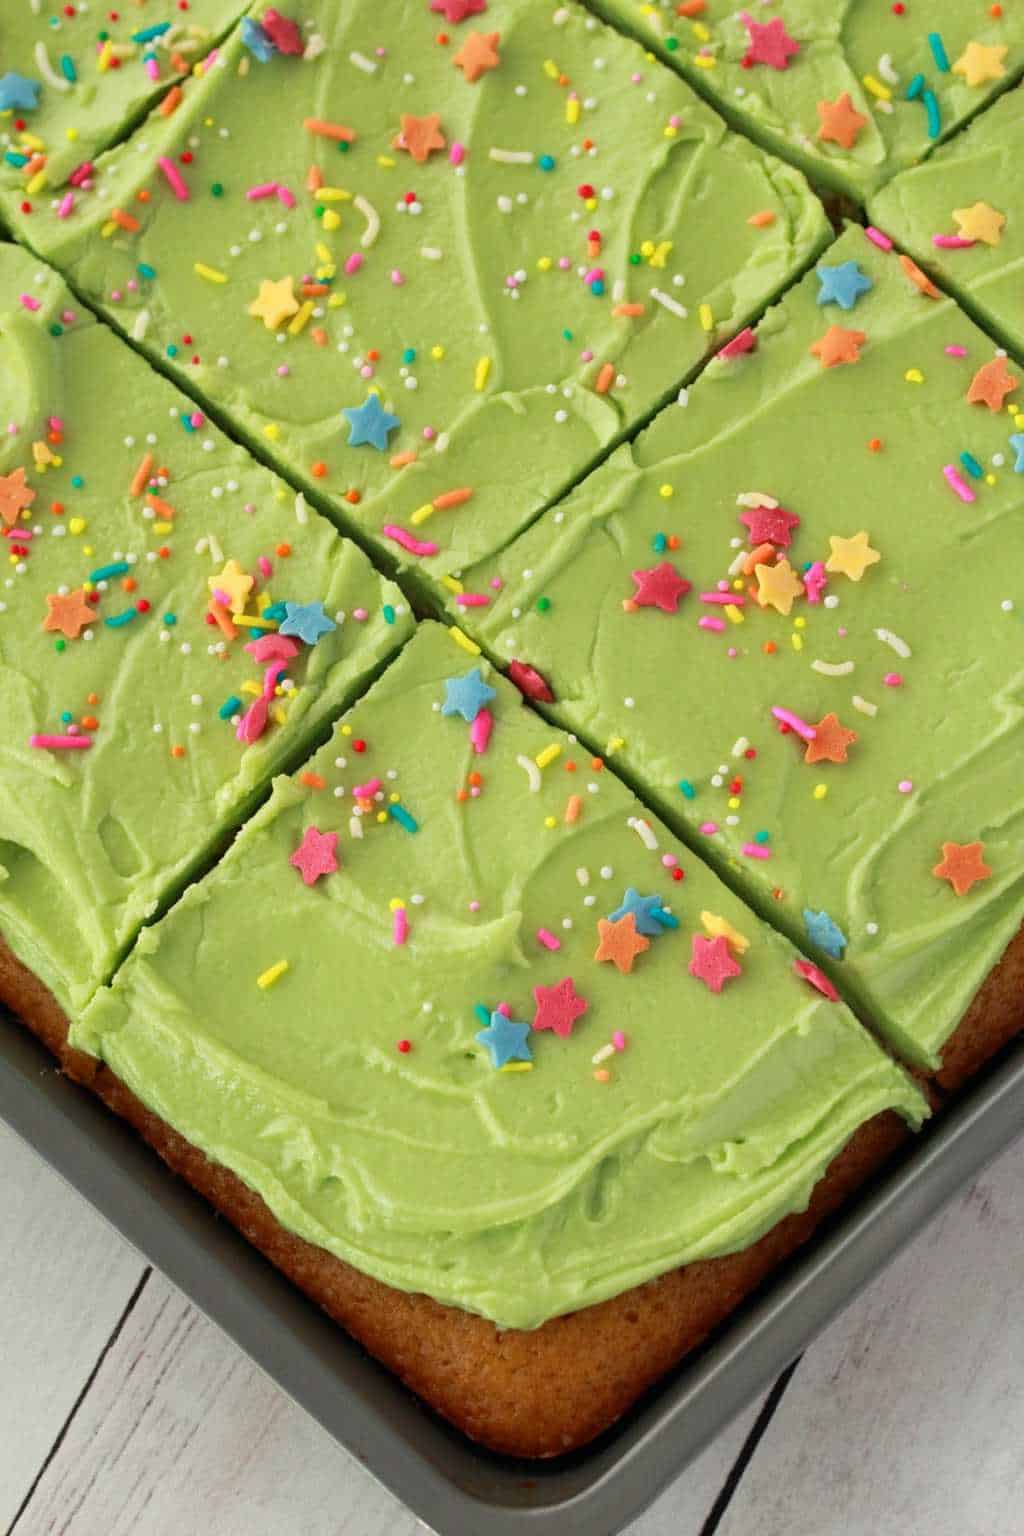 Vanilla sheet cake with green frosting and sprinkles.